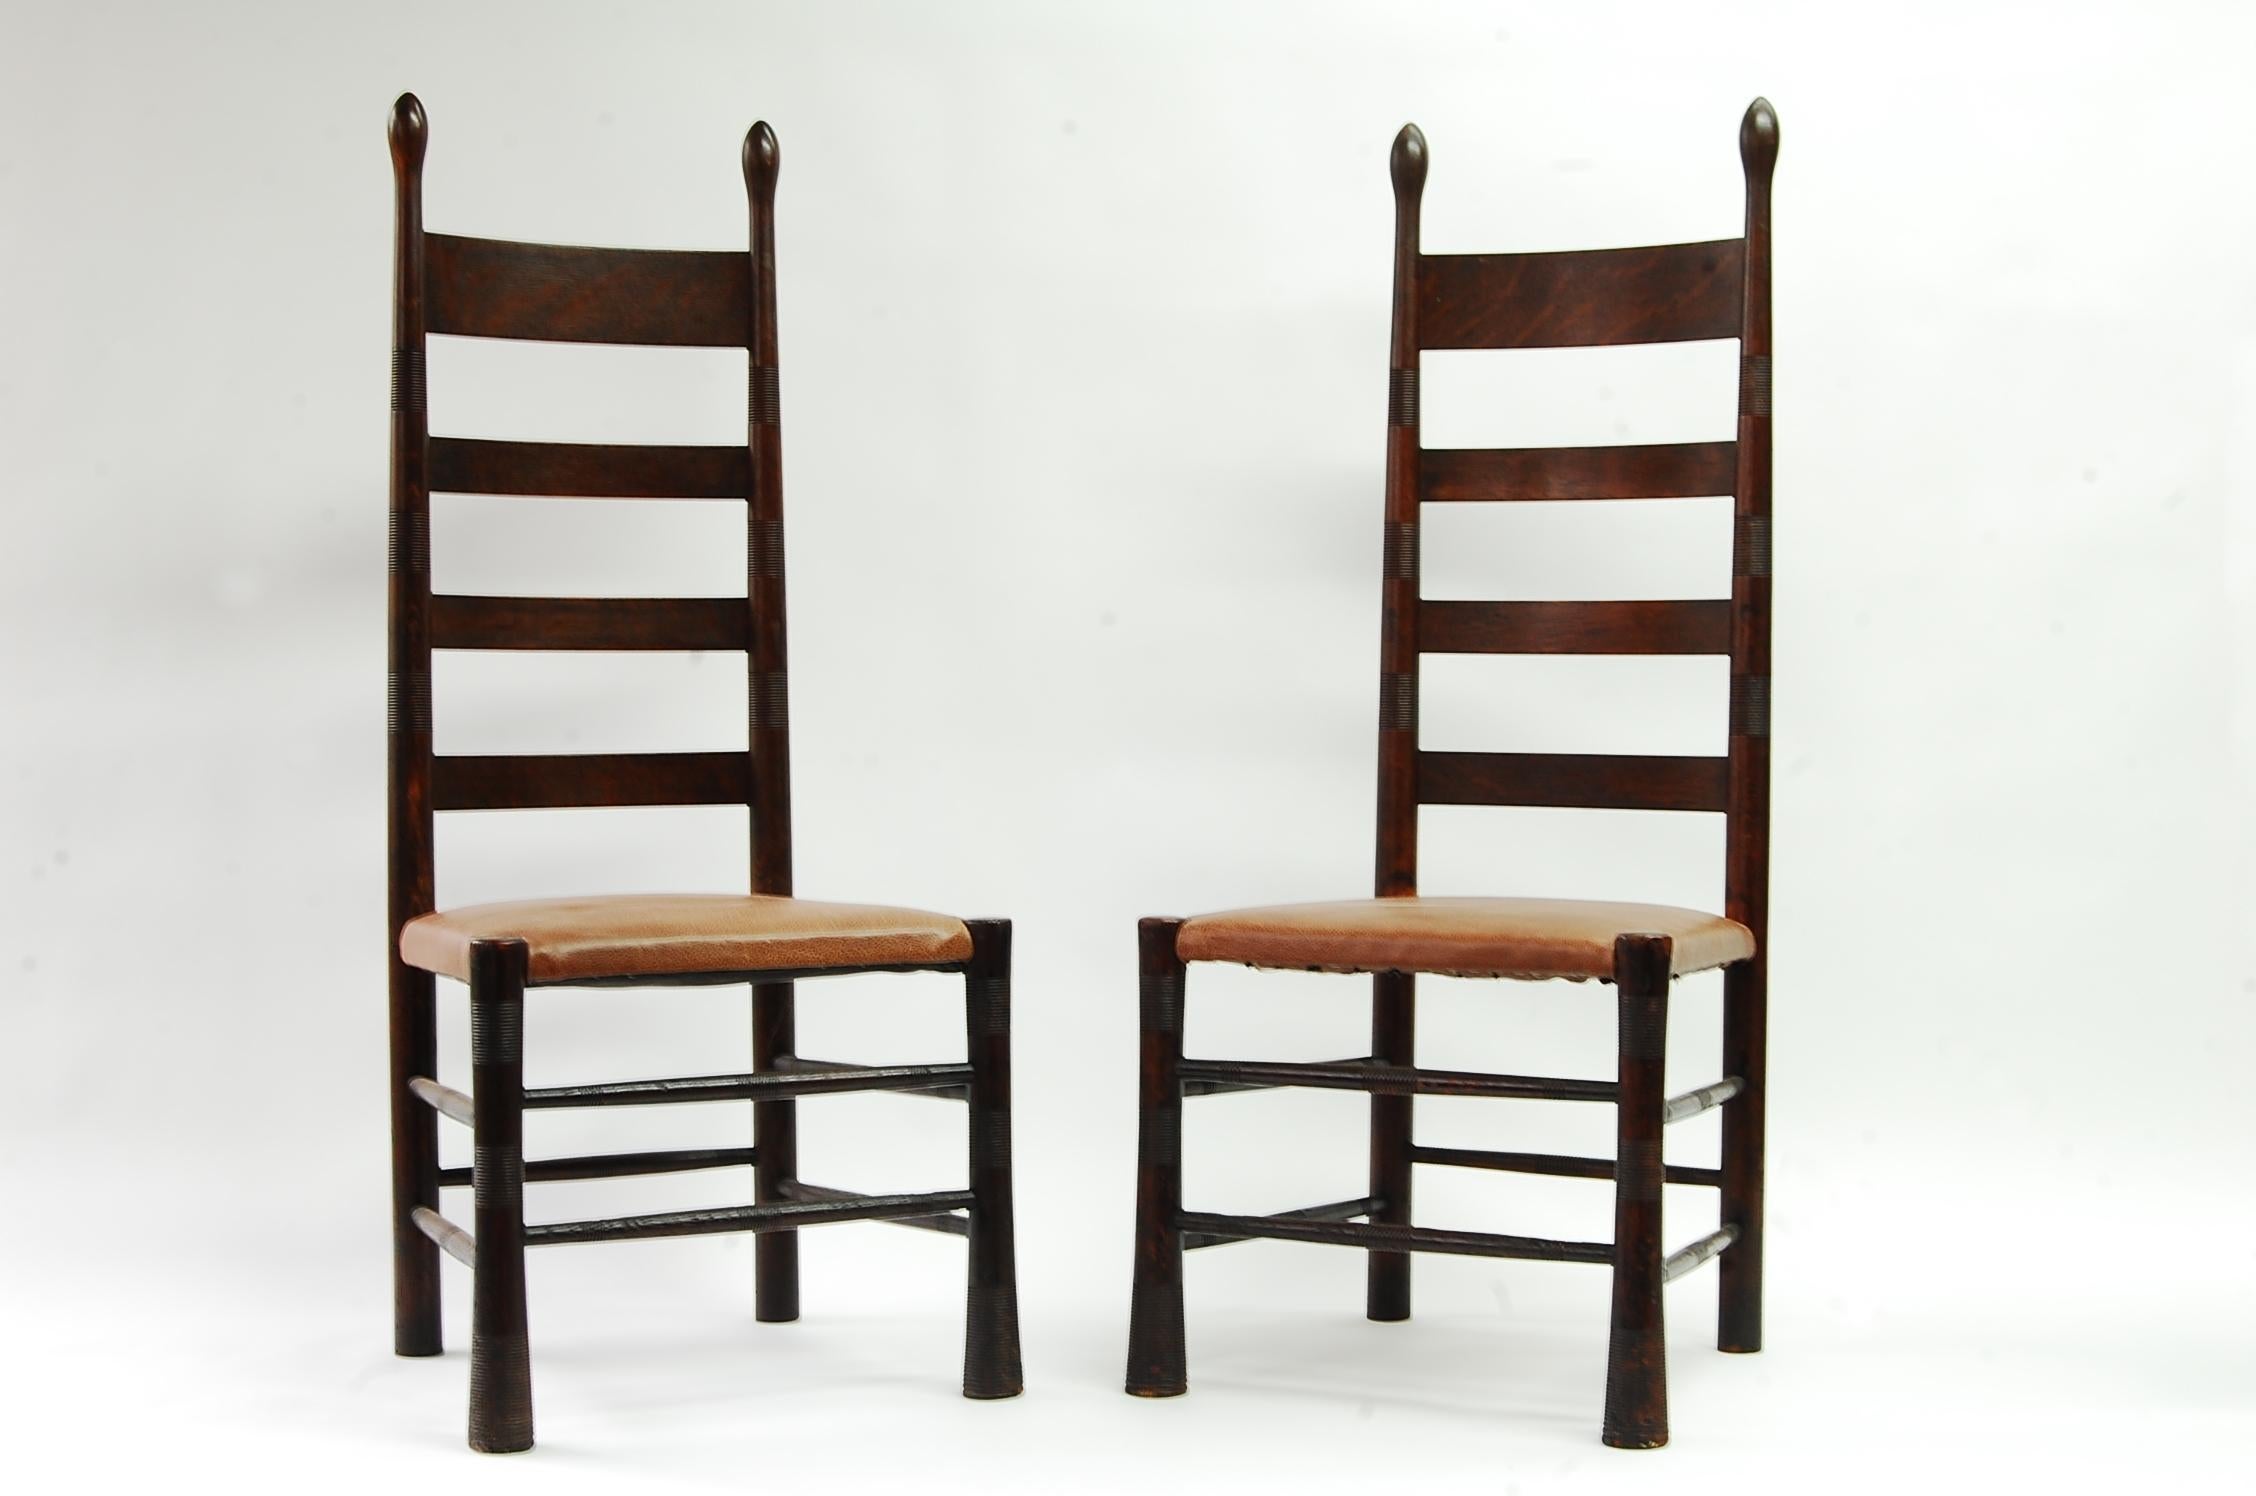 Pair of English Aesthetic Movement chairs in oak, circa 1890-1910, attributed to E.G. Punnet & William Birch. Most likely retailed by Liberty and Company, London. Some might consider these transitional Arts & Crafts. Currently upholstered in